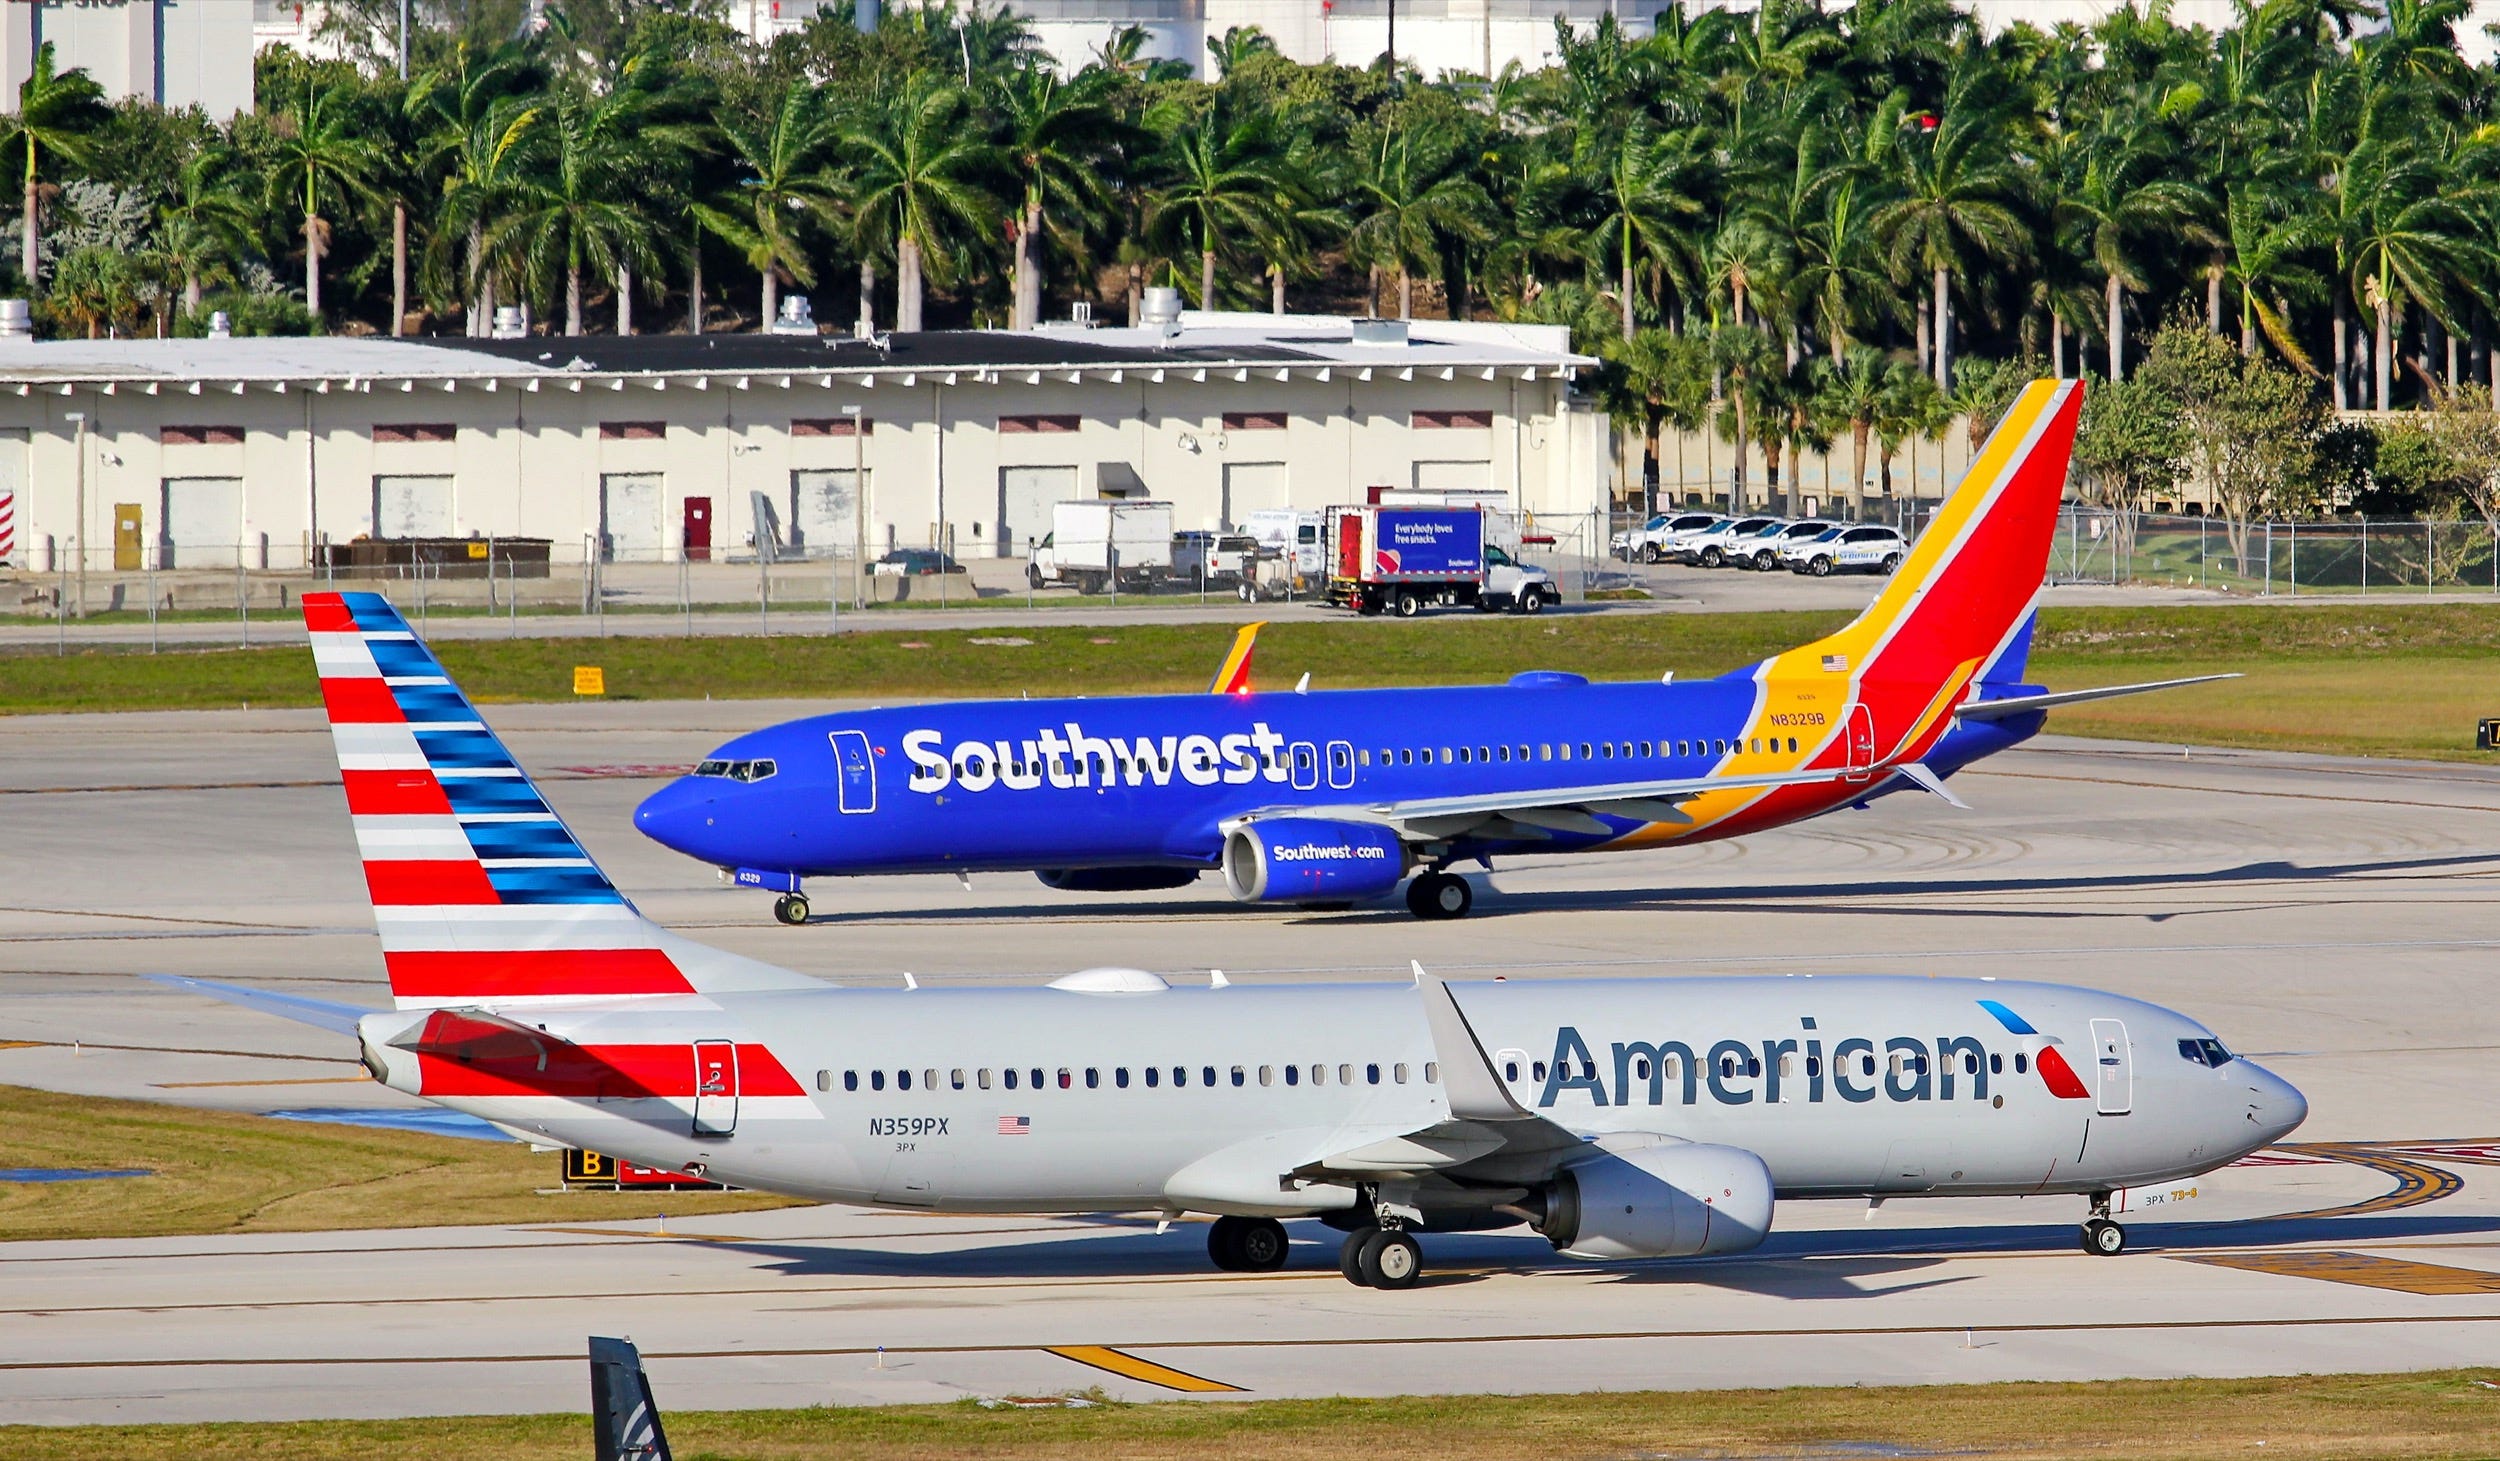 American Airlines and Southwest Airlines planes